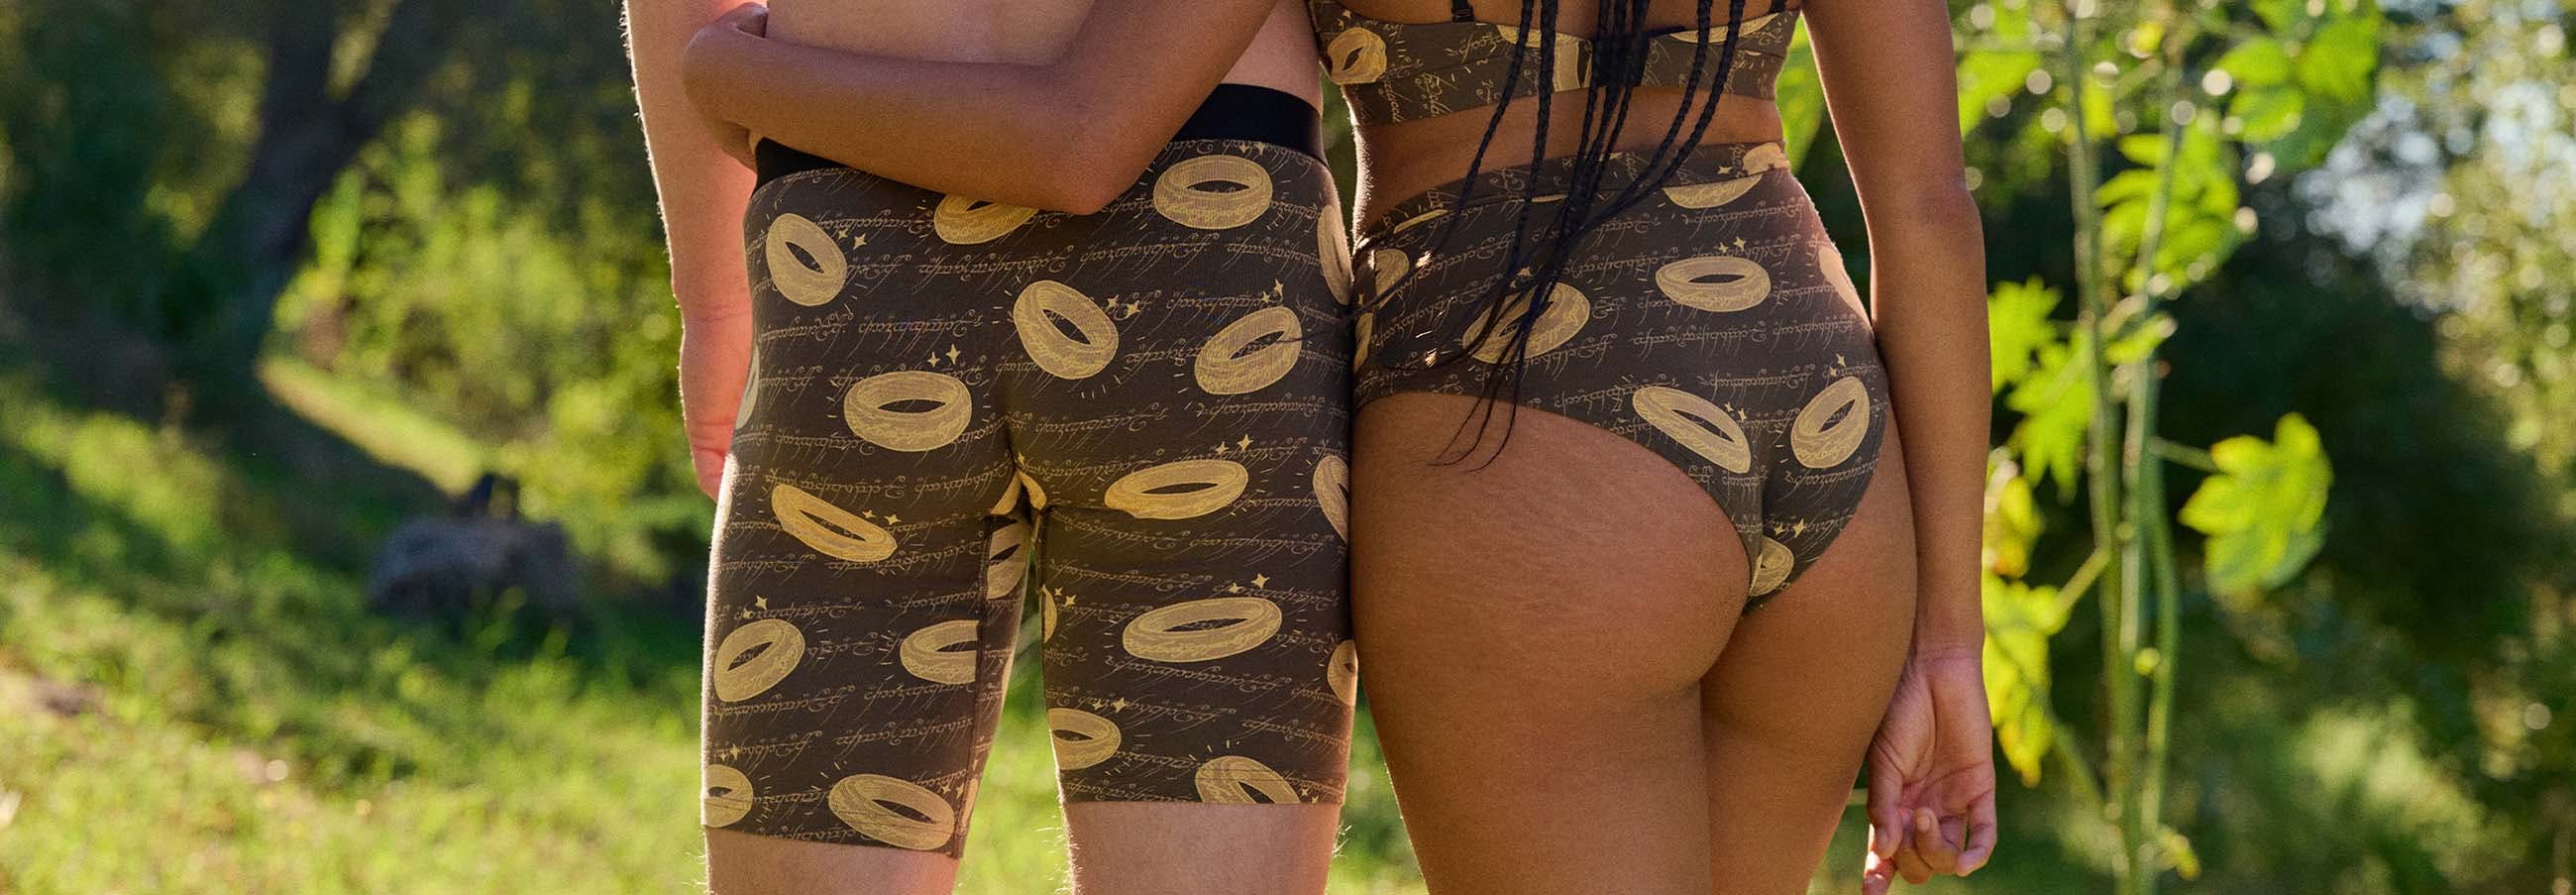 The Lord of the Rings™ x MeUndies